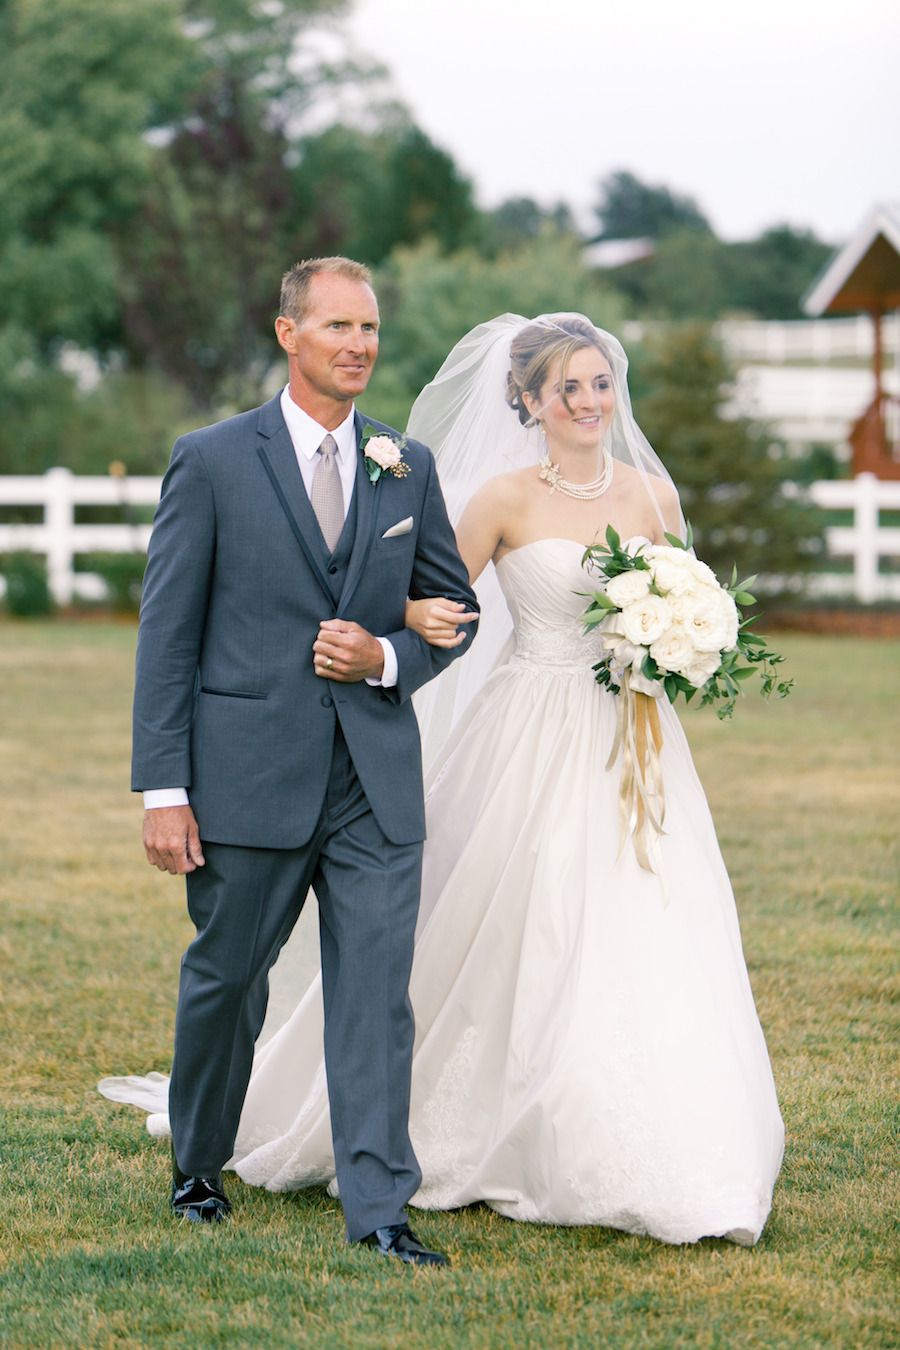 Bridal Fathers suits father of the bride - charcoal gray suit, white shirt (point collar), OZDDBRJ